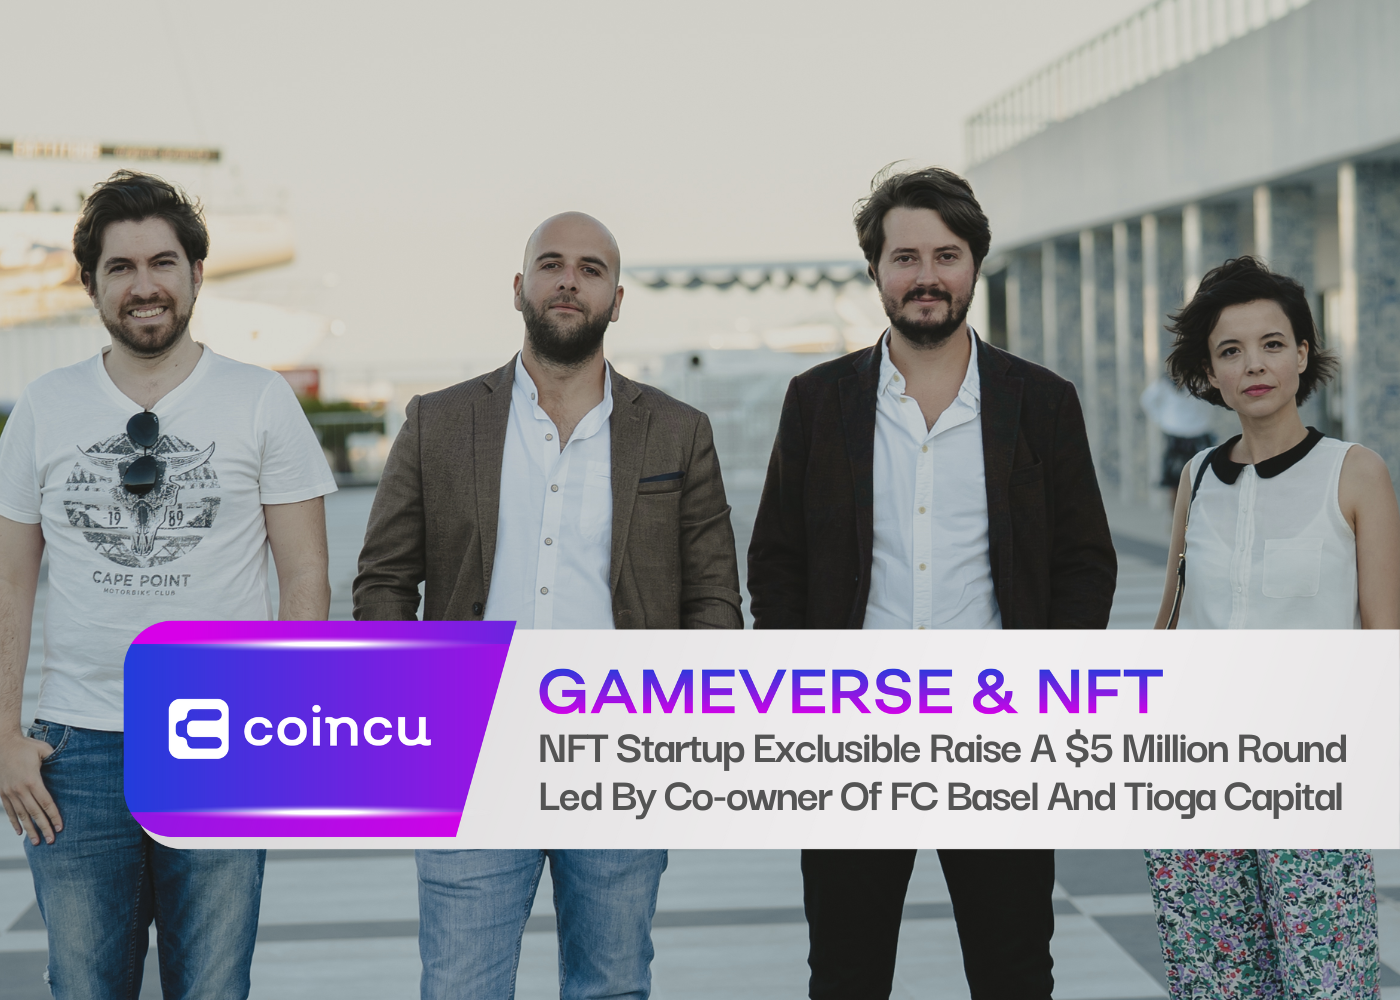 NFT Startup Exclusible Raise A $5 Million Round Led By Co-owner Of FC Basel And Tioga Capital